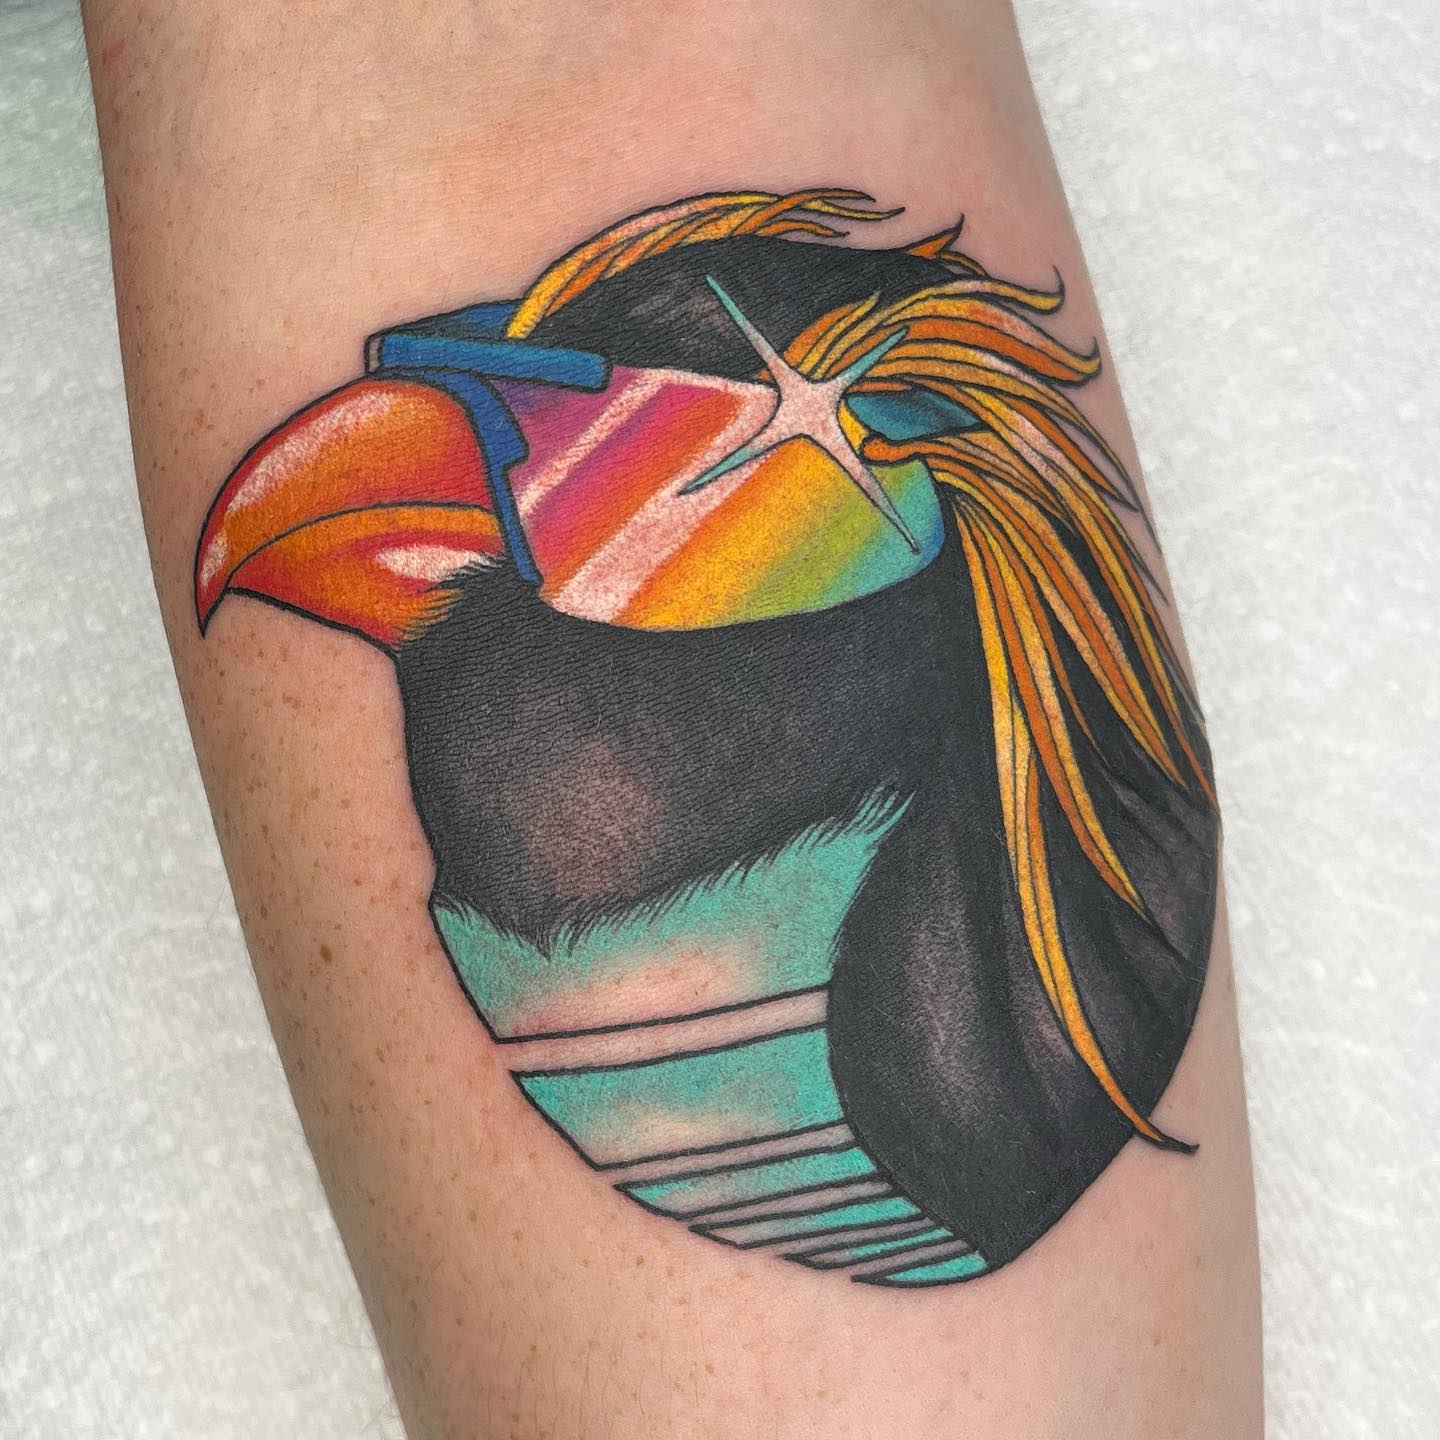 It is so hard to resist this cool penguin head design, isn't it? Its color palette will take your tattoo to a whole different level and everyone will come closer to check it out.